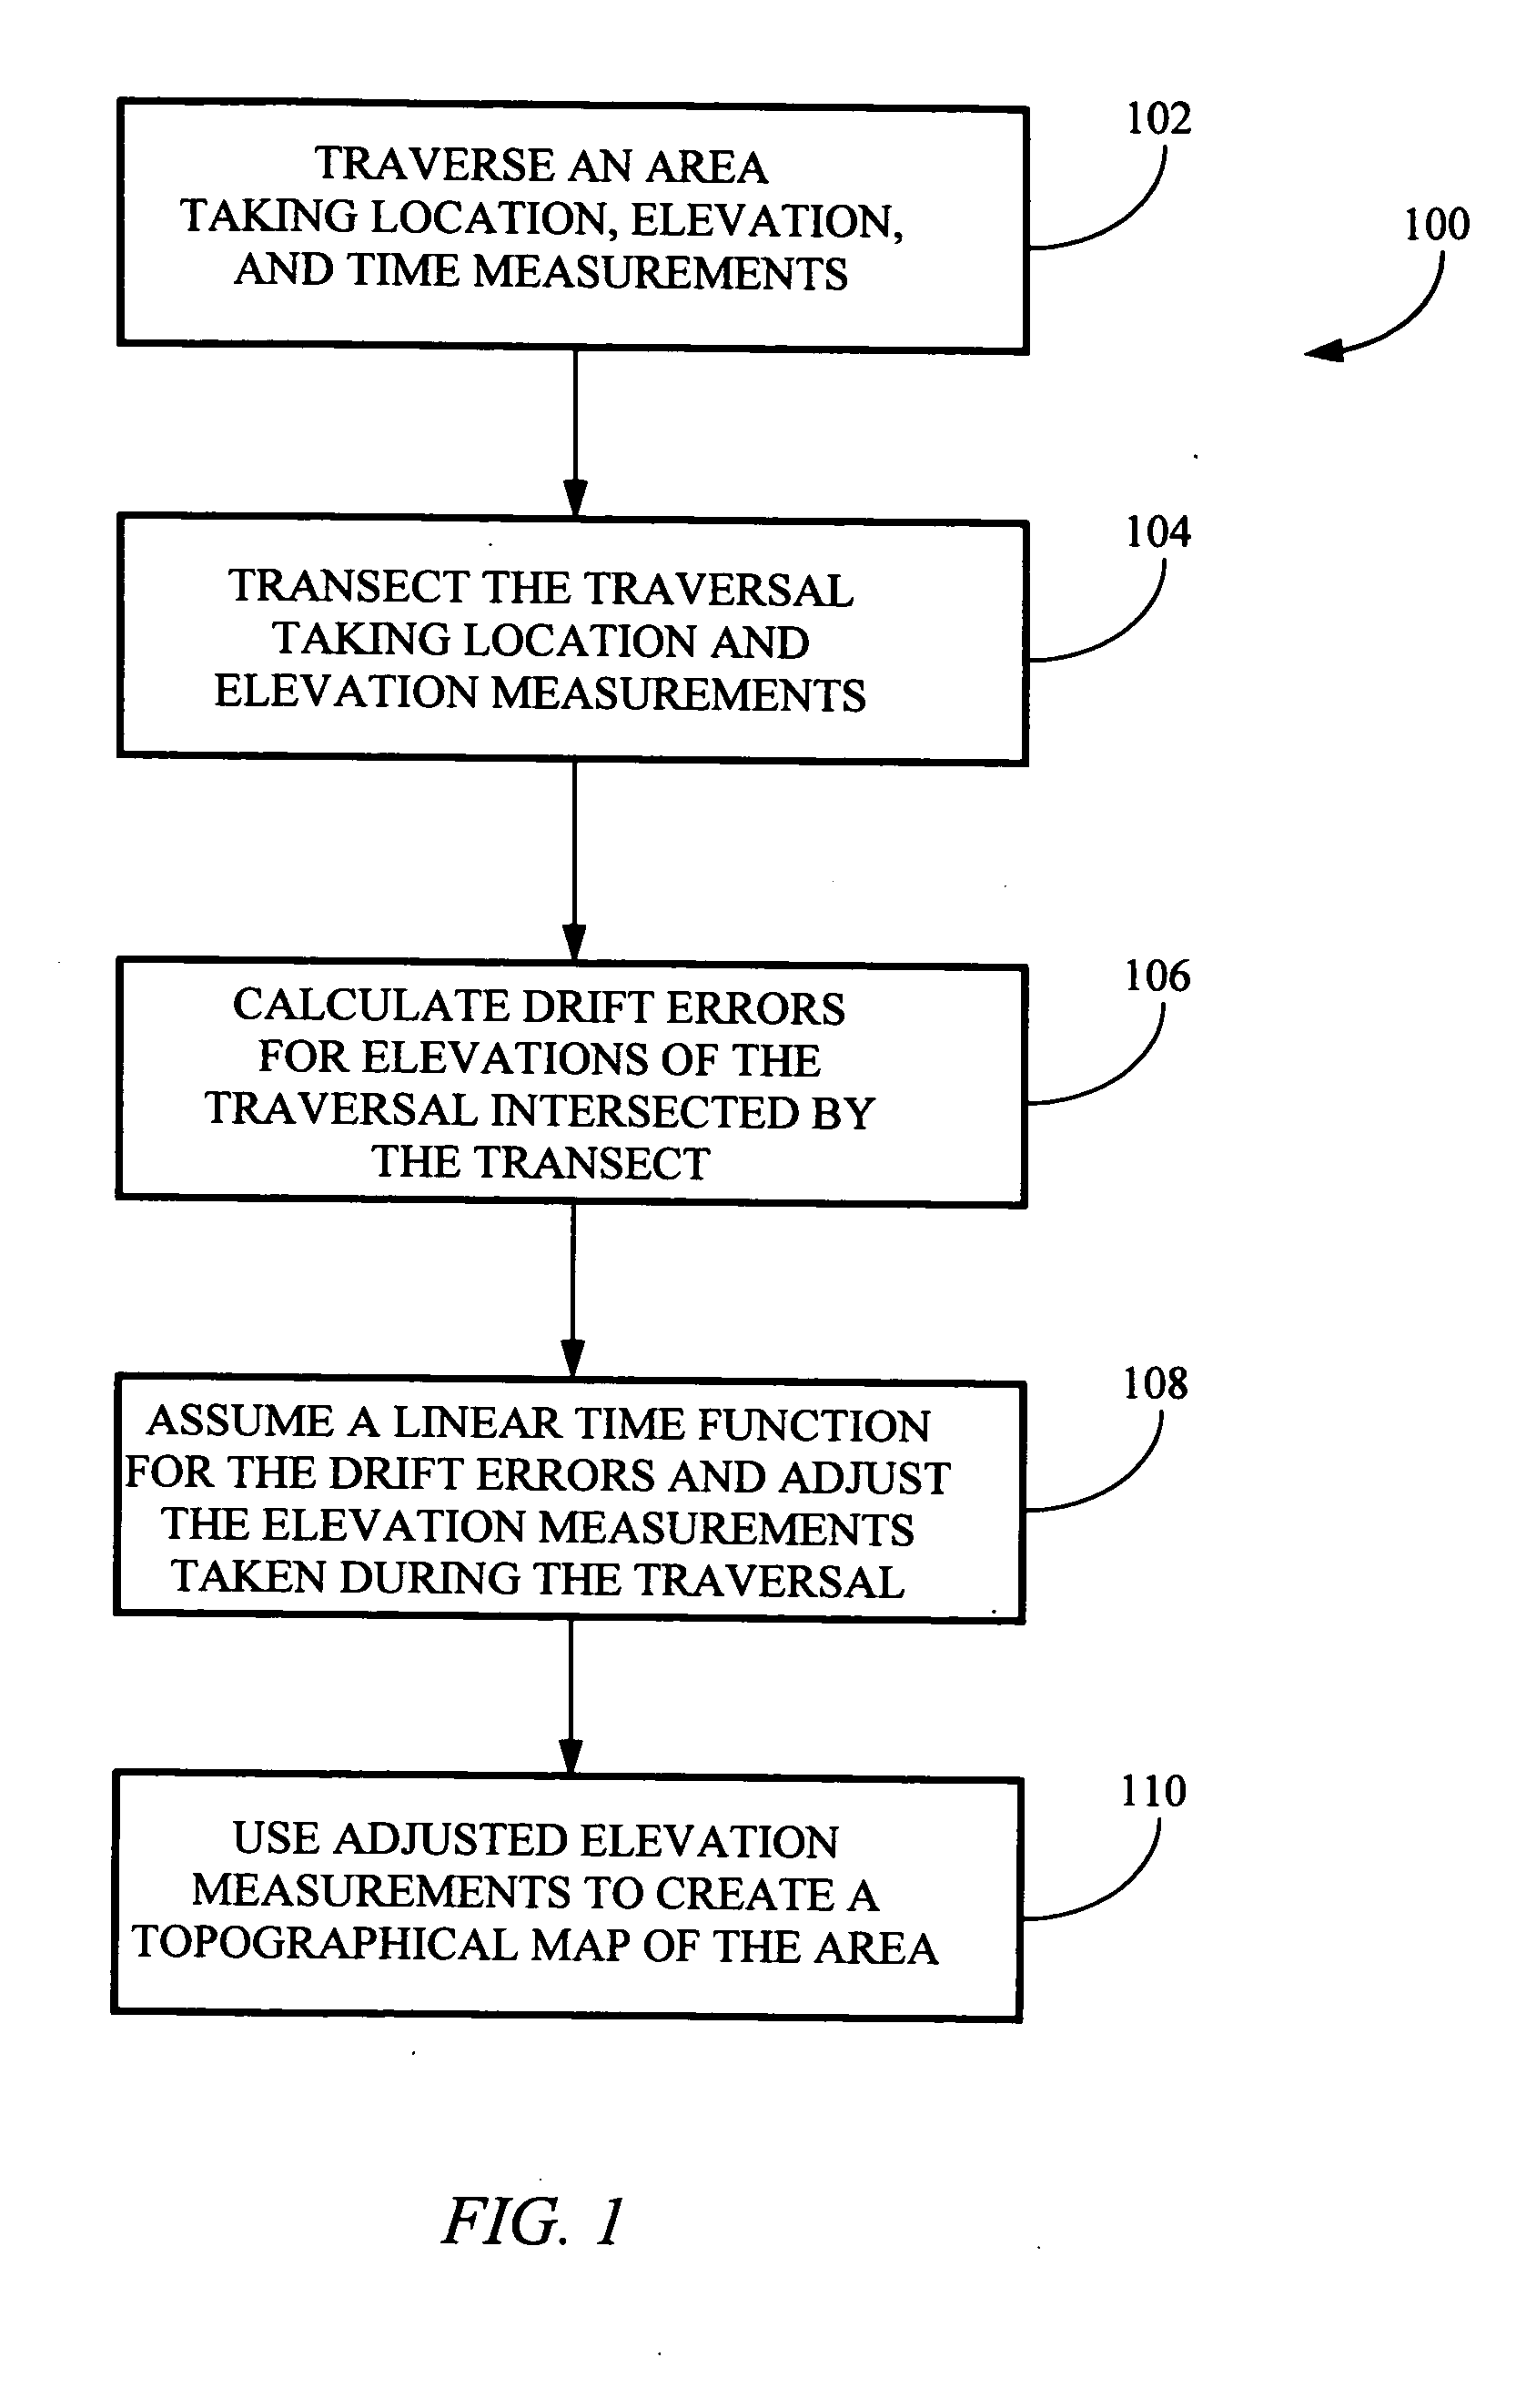 System and method for creating accurate topographical maps using low-drift DGPS